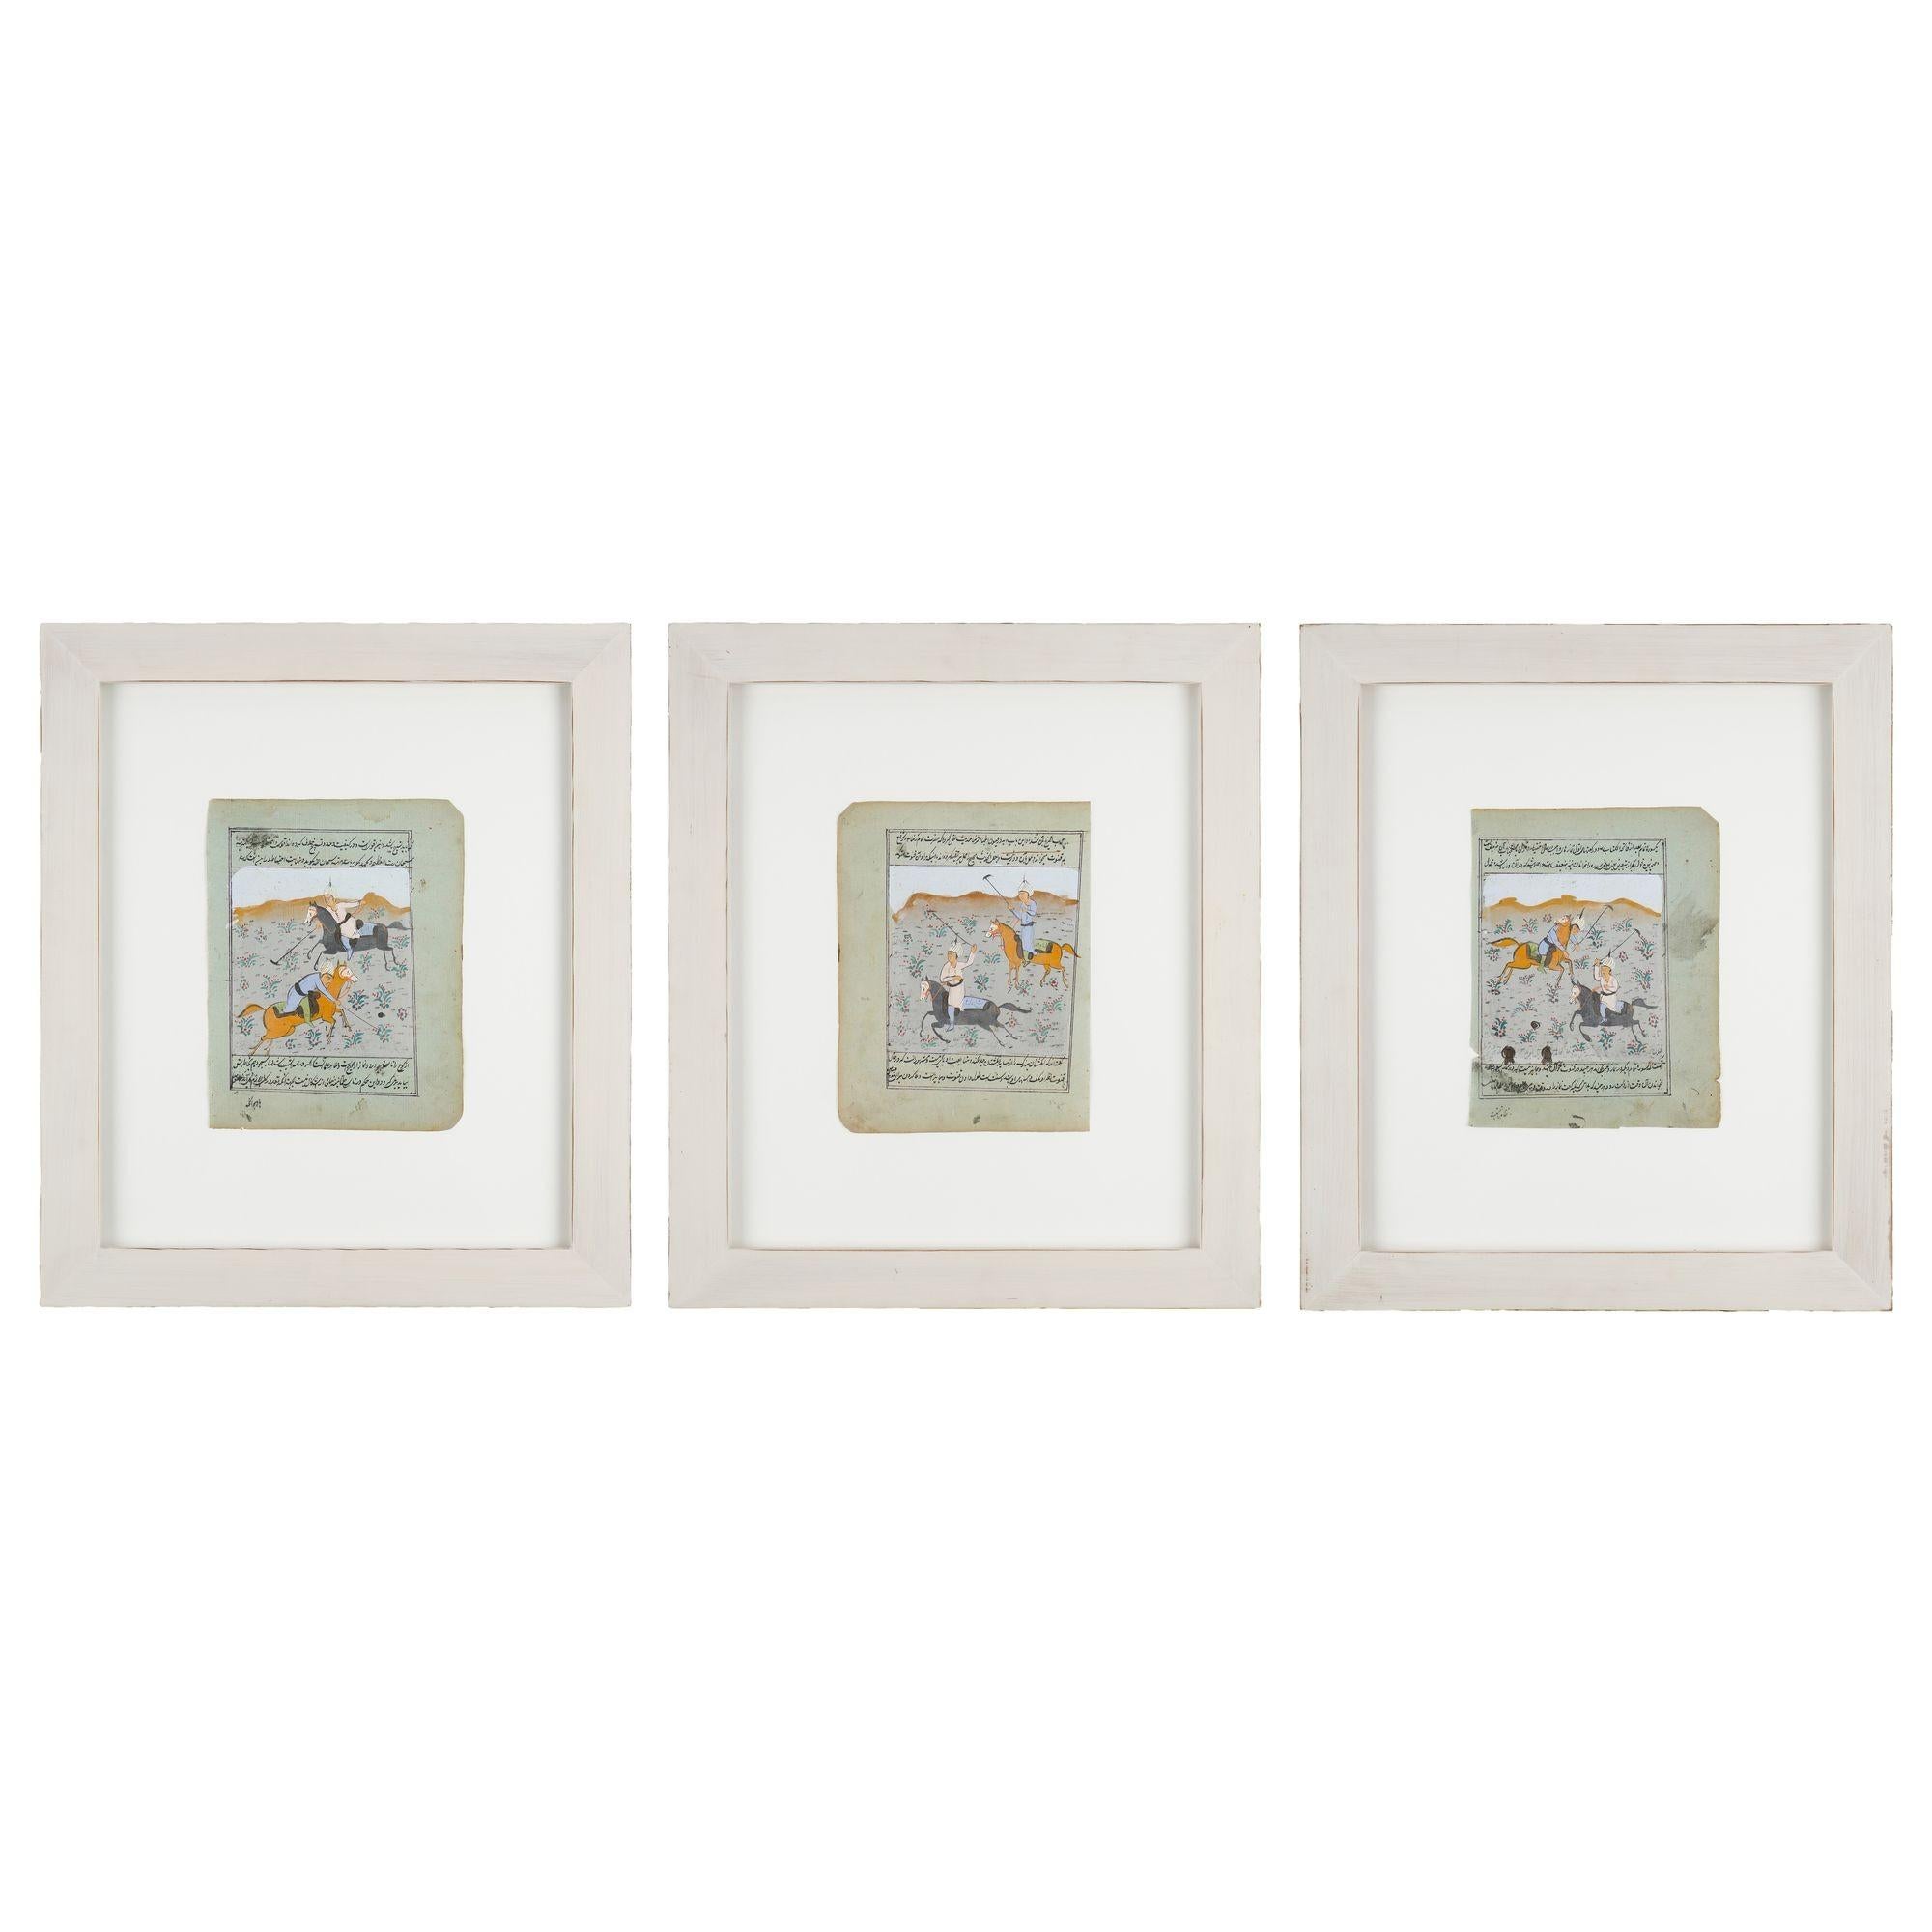 Three Persian miniature gouache paintings on hand laid paper of polo players on a flower covered field. All works have been archival mounted and framed under UV filtering plexiglass.

Iranian, 19th century.